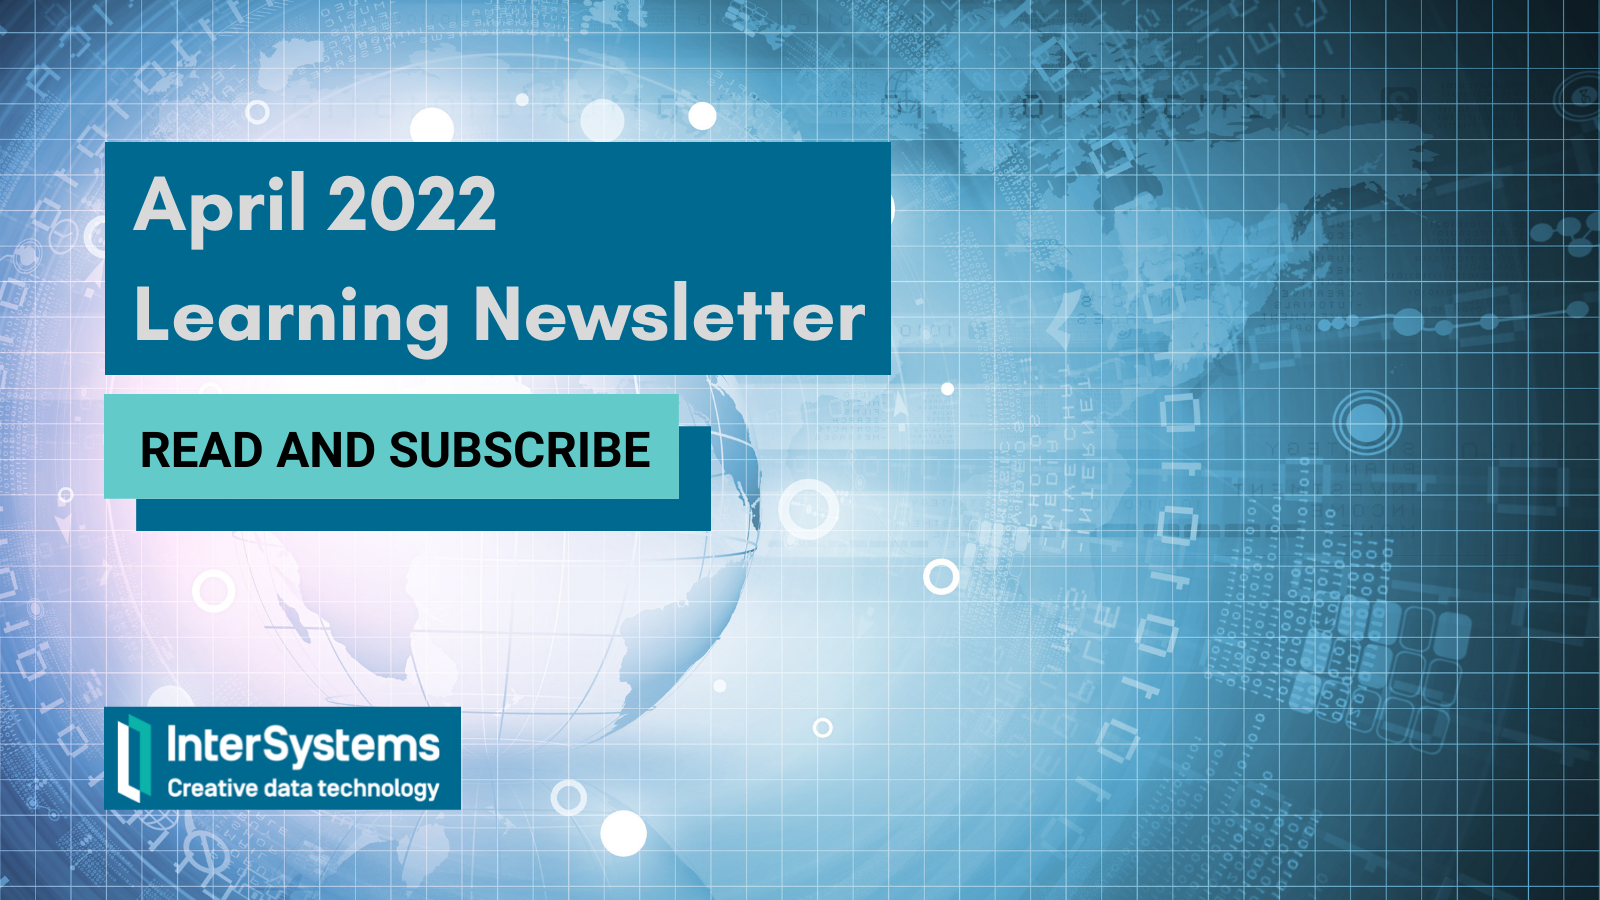 April 2022 Learning Newsletter: Read and Subscribe